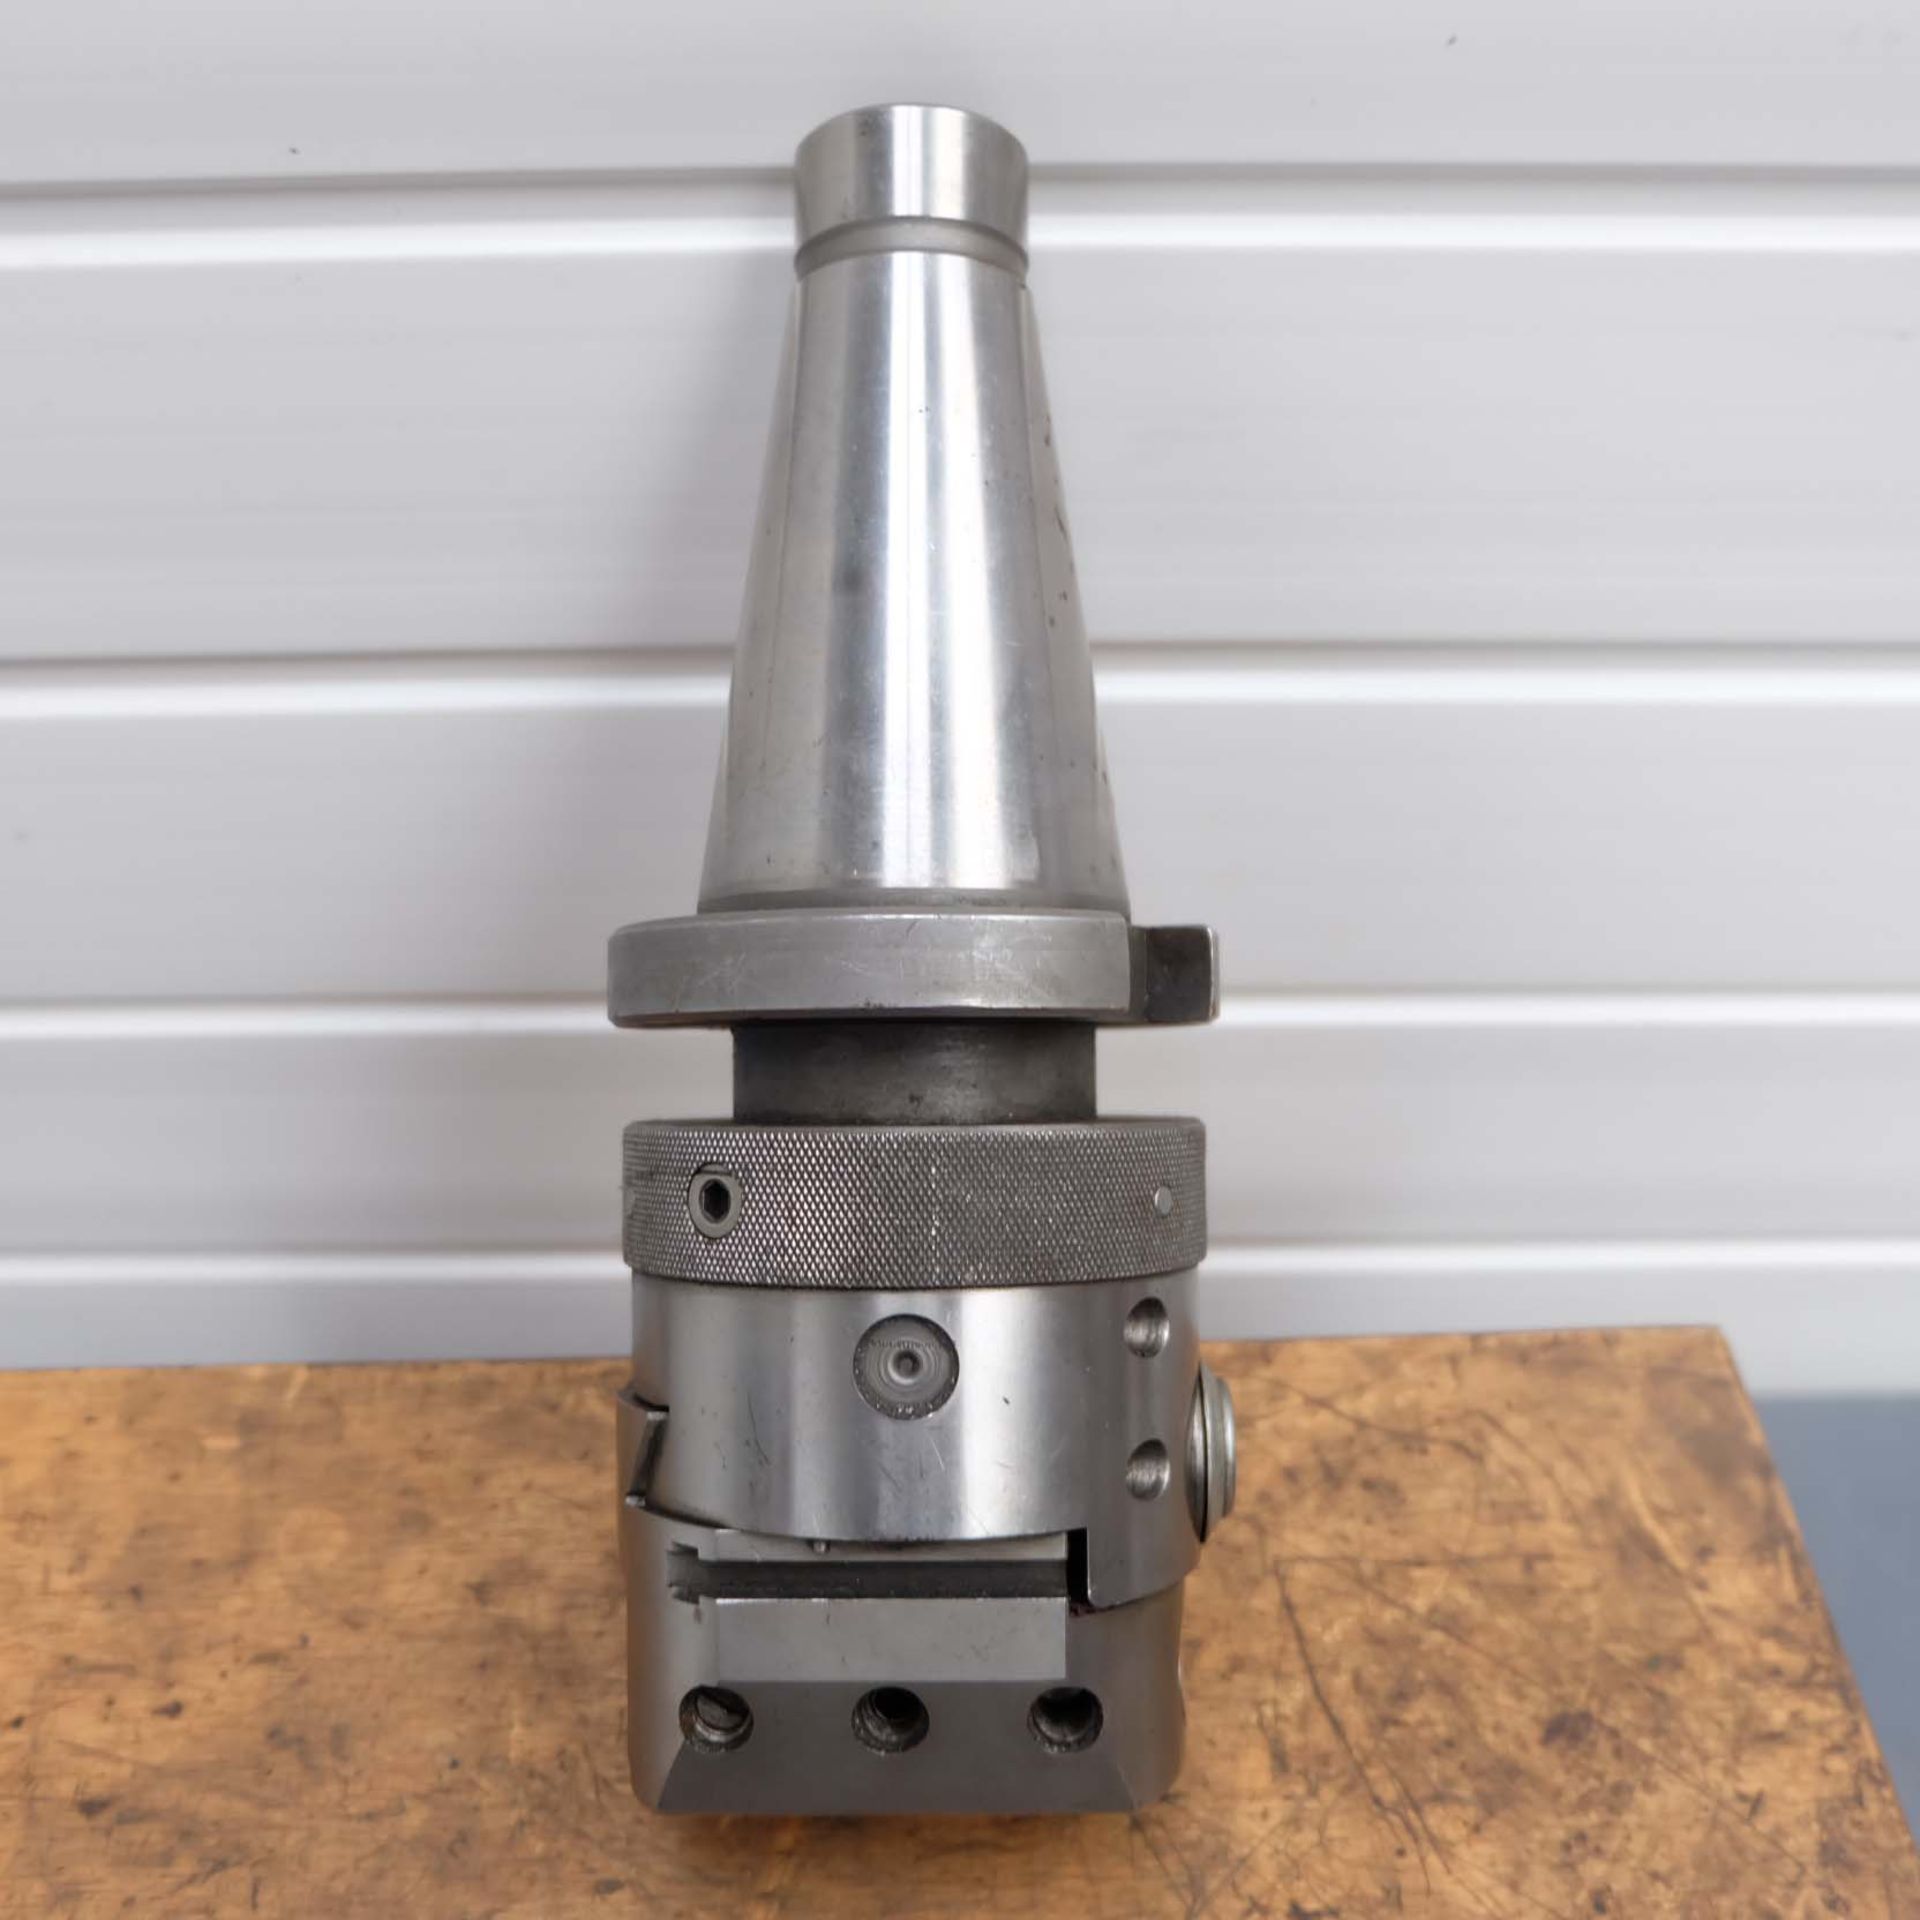 Boring & Facing Head. Head Size: 3 1/2" Diameter. Spindle Taper 50ISO x 1" Whit. - Image 3 of 7